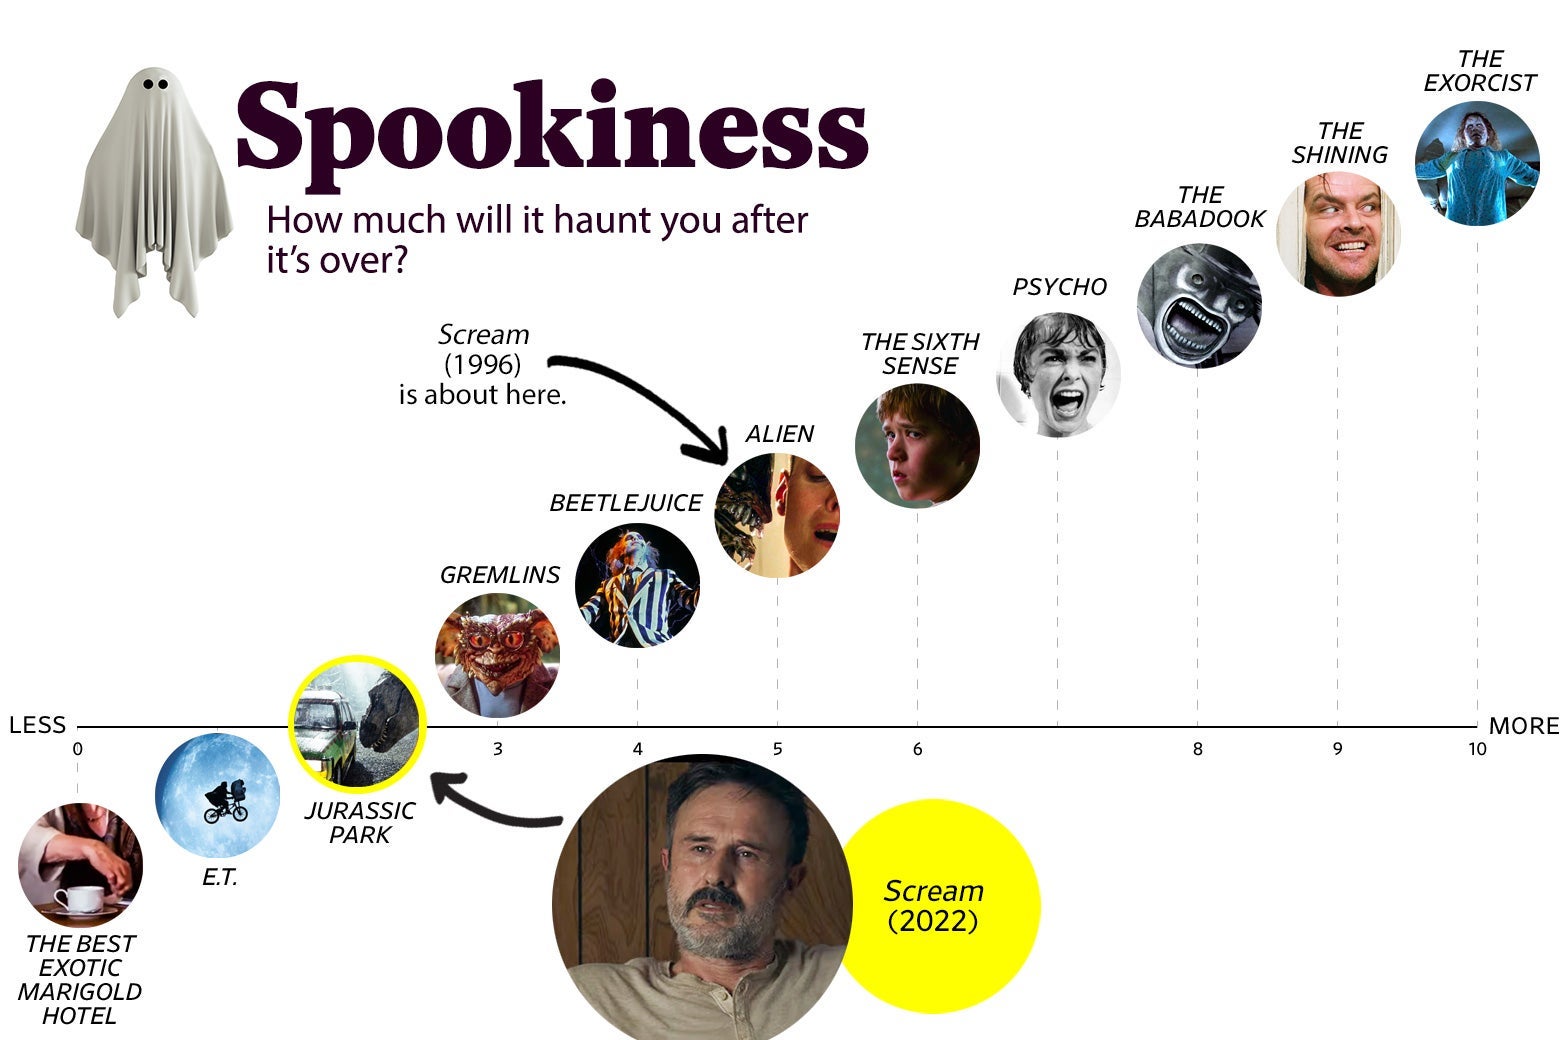 A chart titled “Spookiness: How much will it haunt you after the movie is over?” shows that Scream (2022) ranks a 2 in spookiness, roughly the same as Jurassic Park, while the original ranks about a 5, roughly the same as Alien. The scale ranges from The Best Exotic Marigold Hotel (0) to The Exorcist (10).